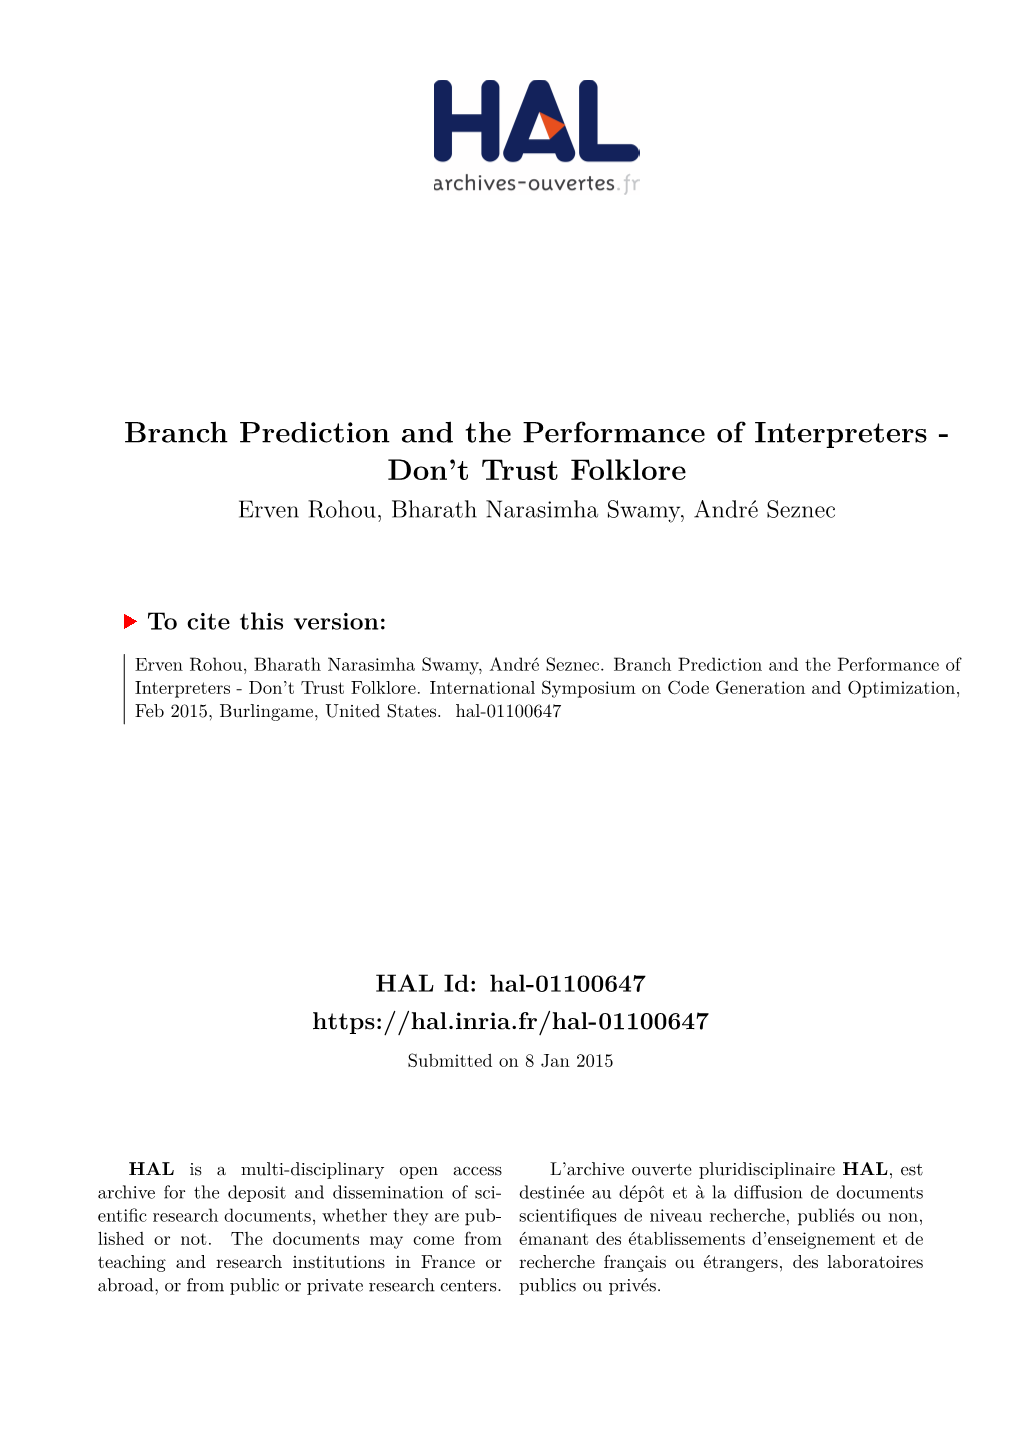 Branch Prediction and the Performance of Interpreters - Don’T Trust Folklore Erven Rohou, Bharath Narasimha Swamy, André Seznec